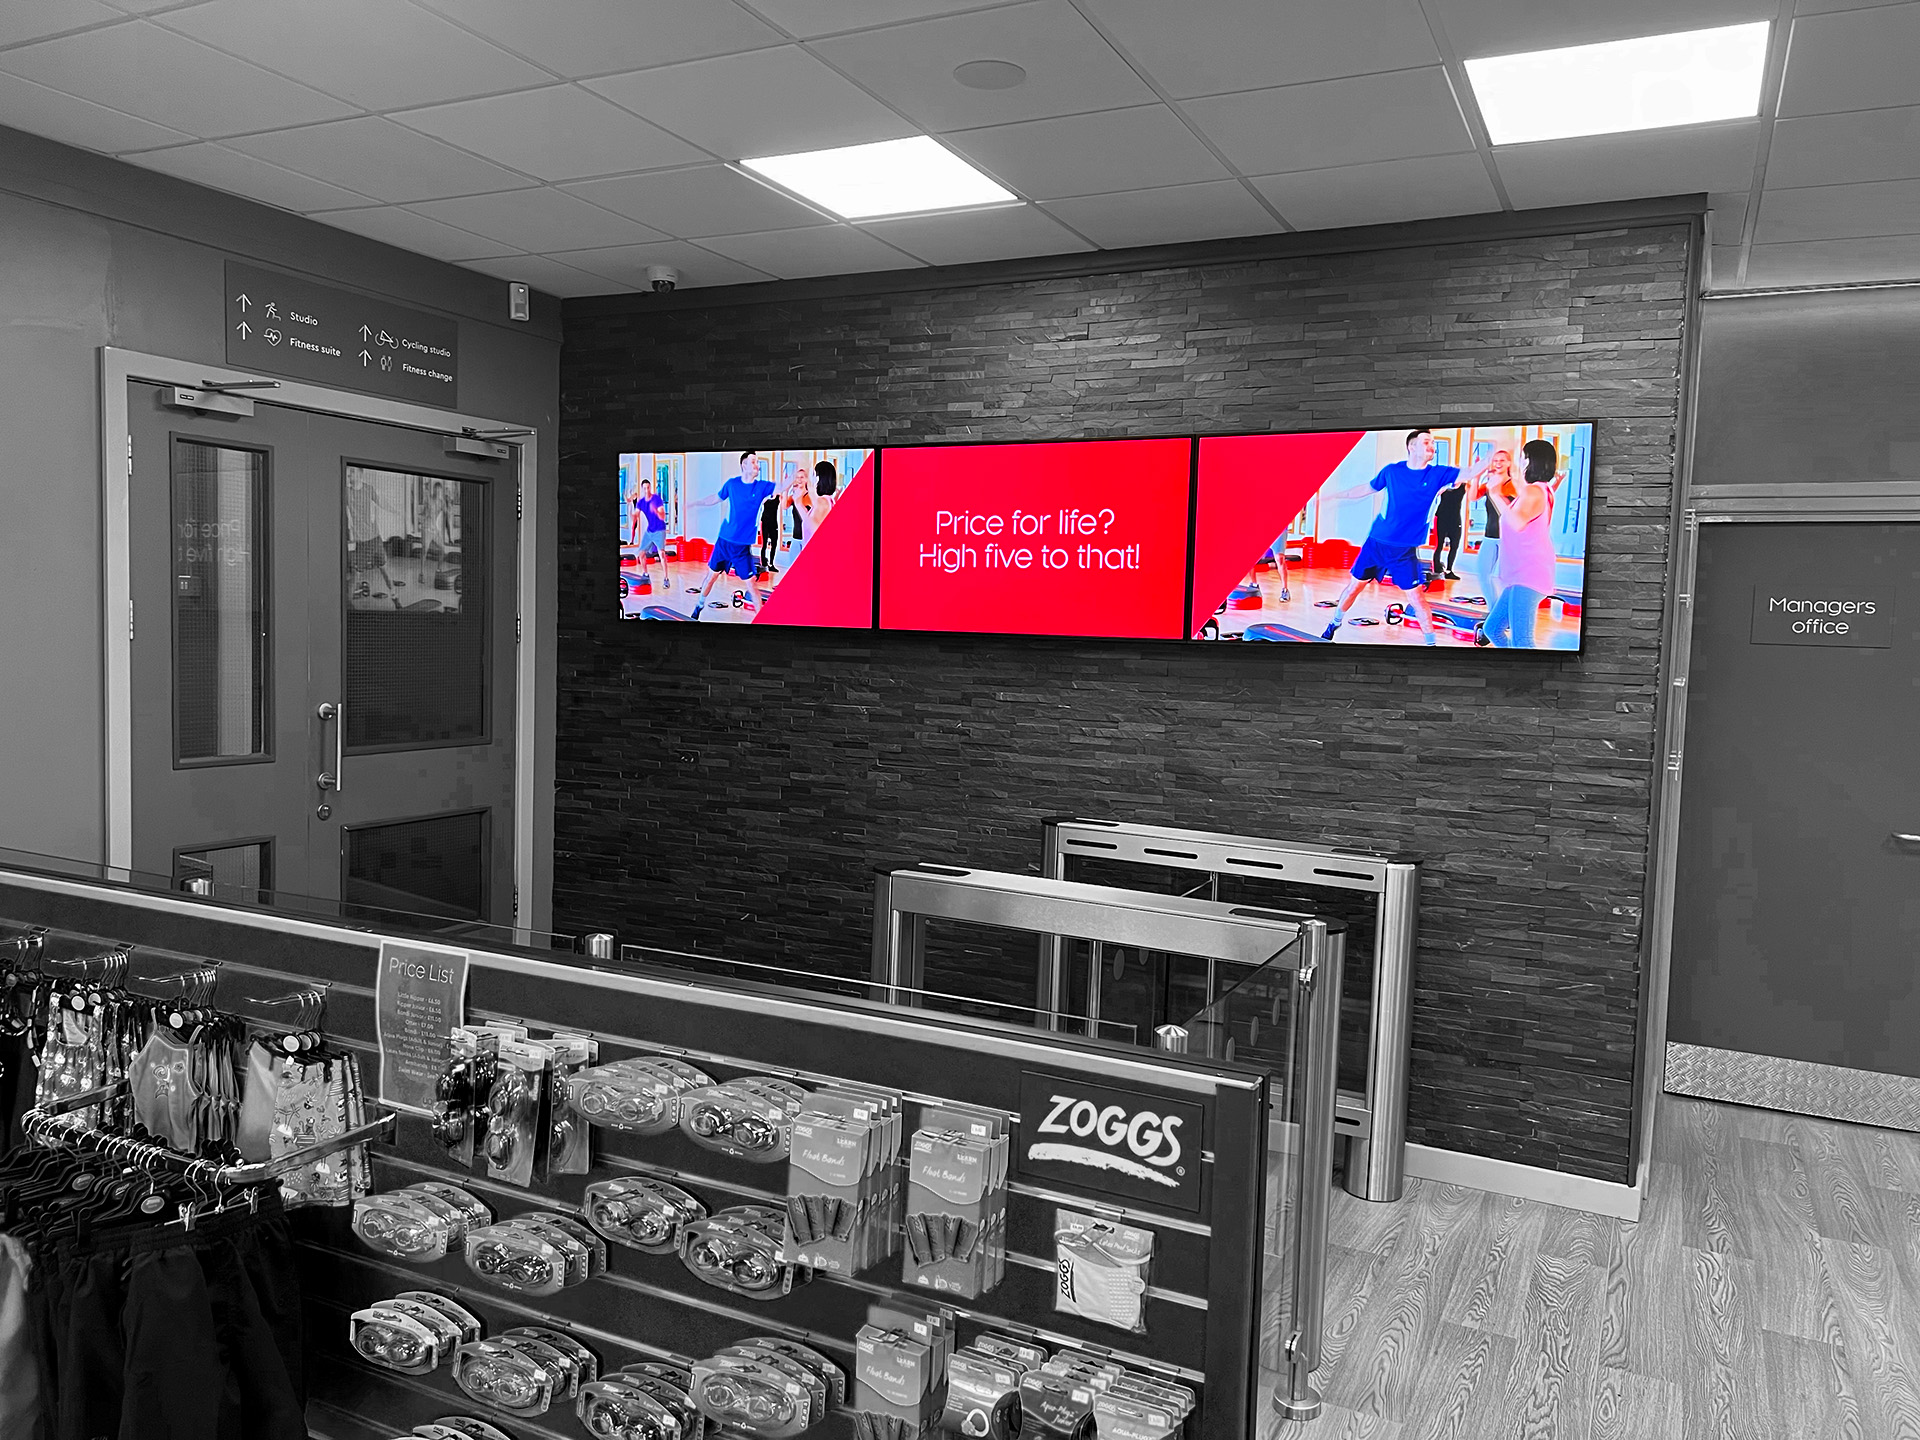 embed signage digital signage software - barnsley premier leisure BPL - 3x1 video wall gym fitness leisure digital signage